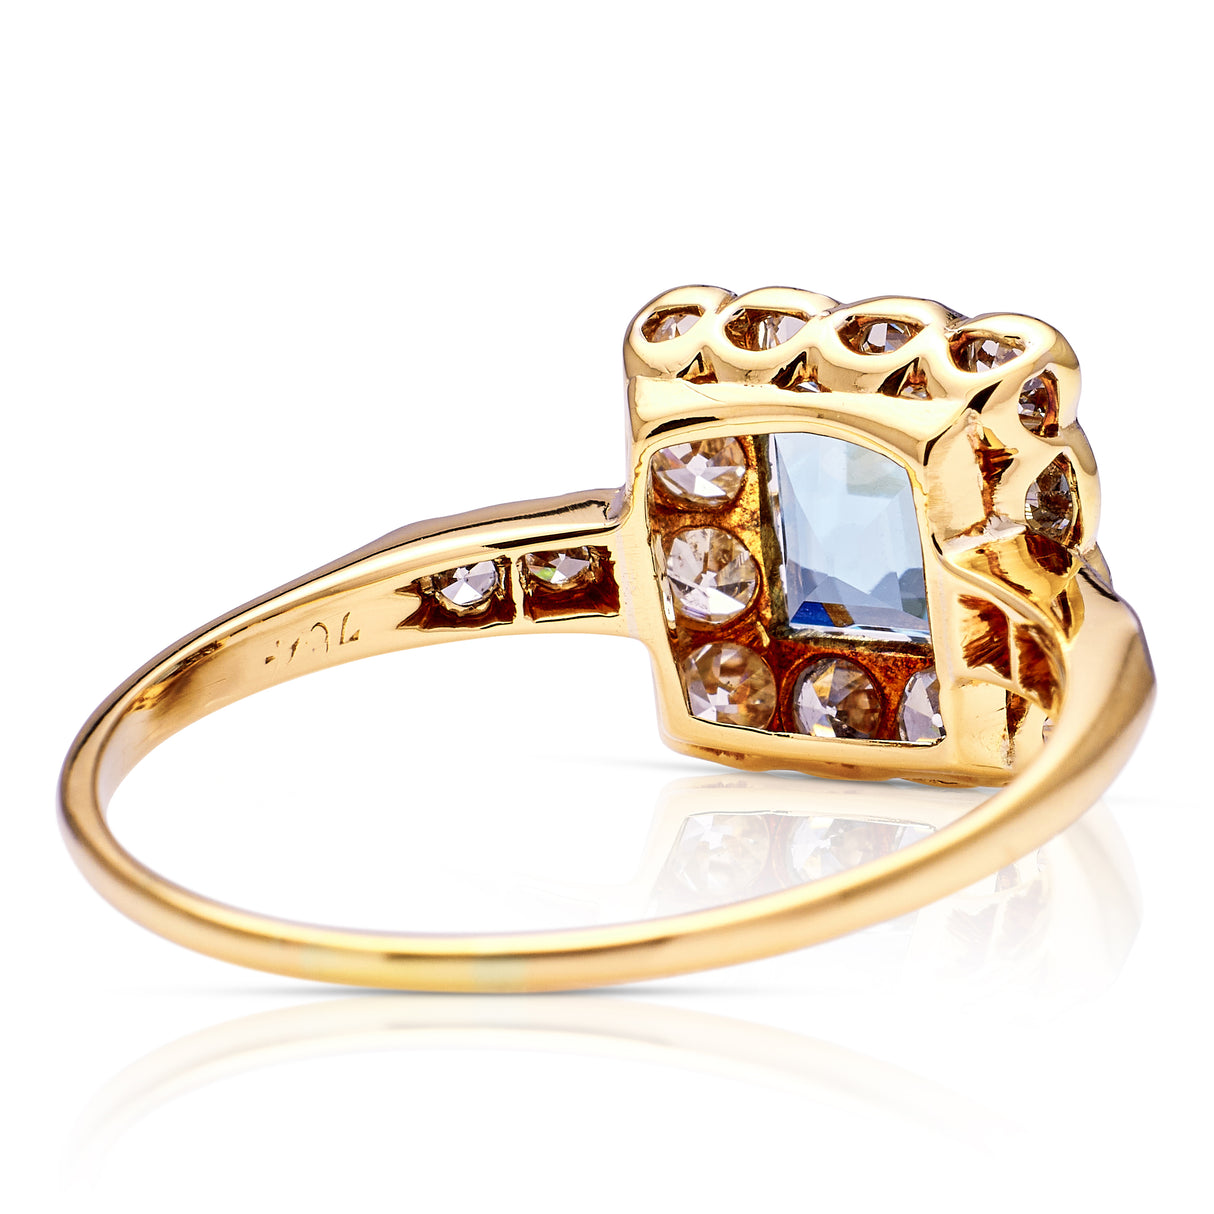 Antique, Edwardian Aquamarine and Diamond Square Cluster Ring, 18ct Yellow Gold and Platinum rear view